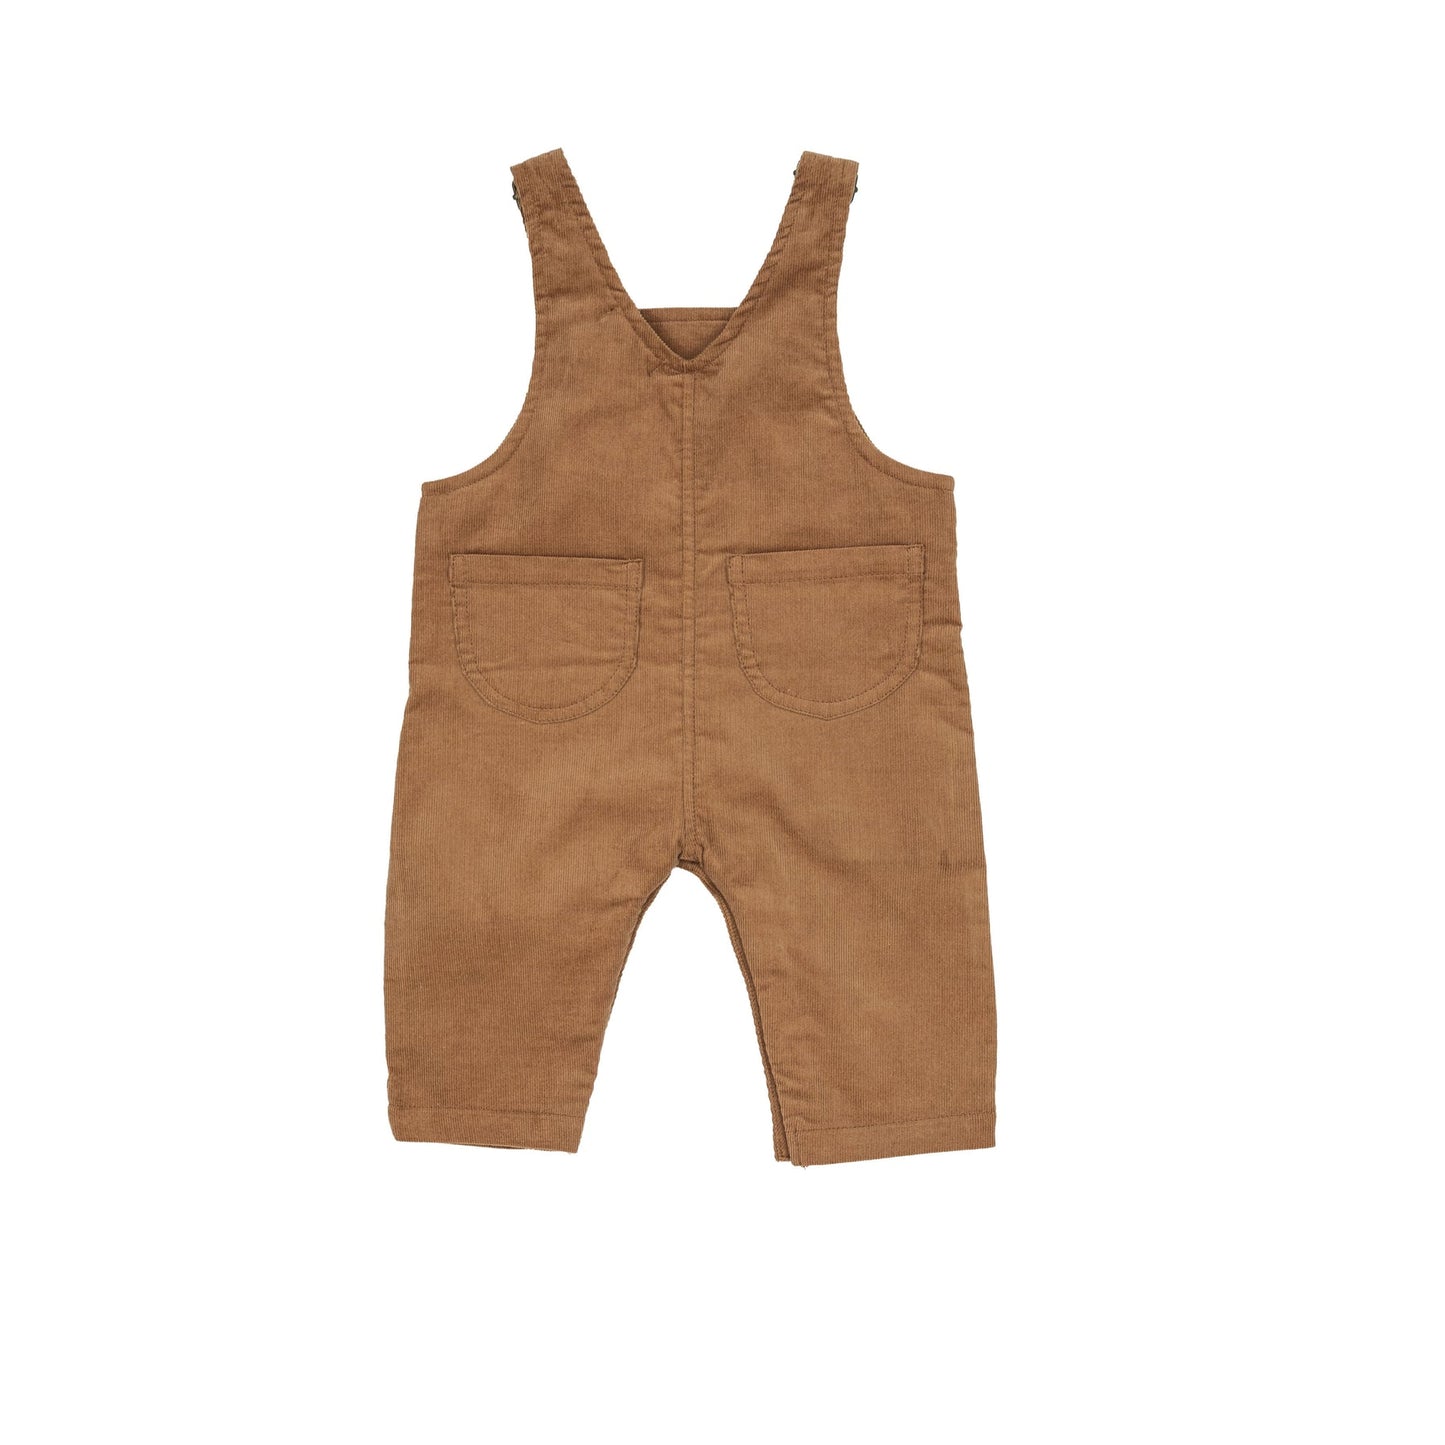 Angel Dear Classic Overall